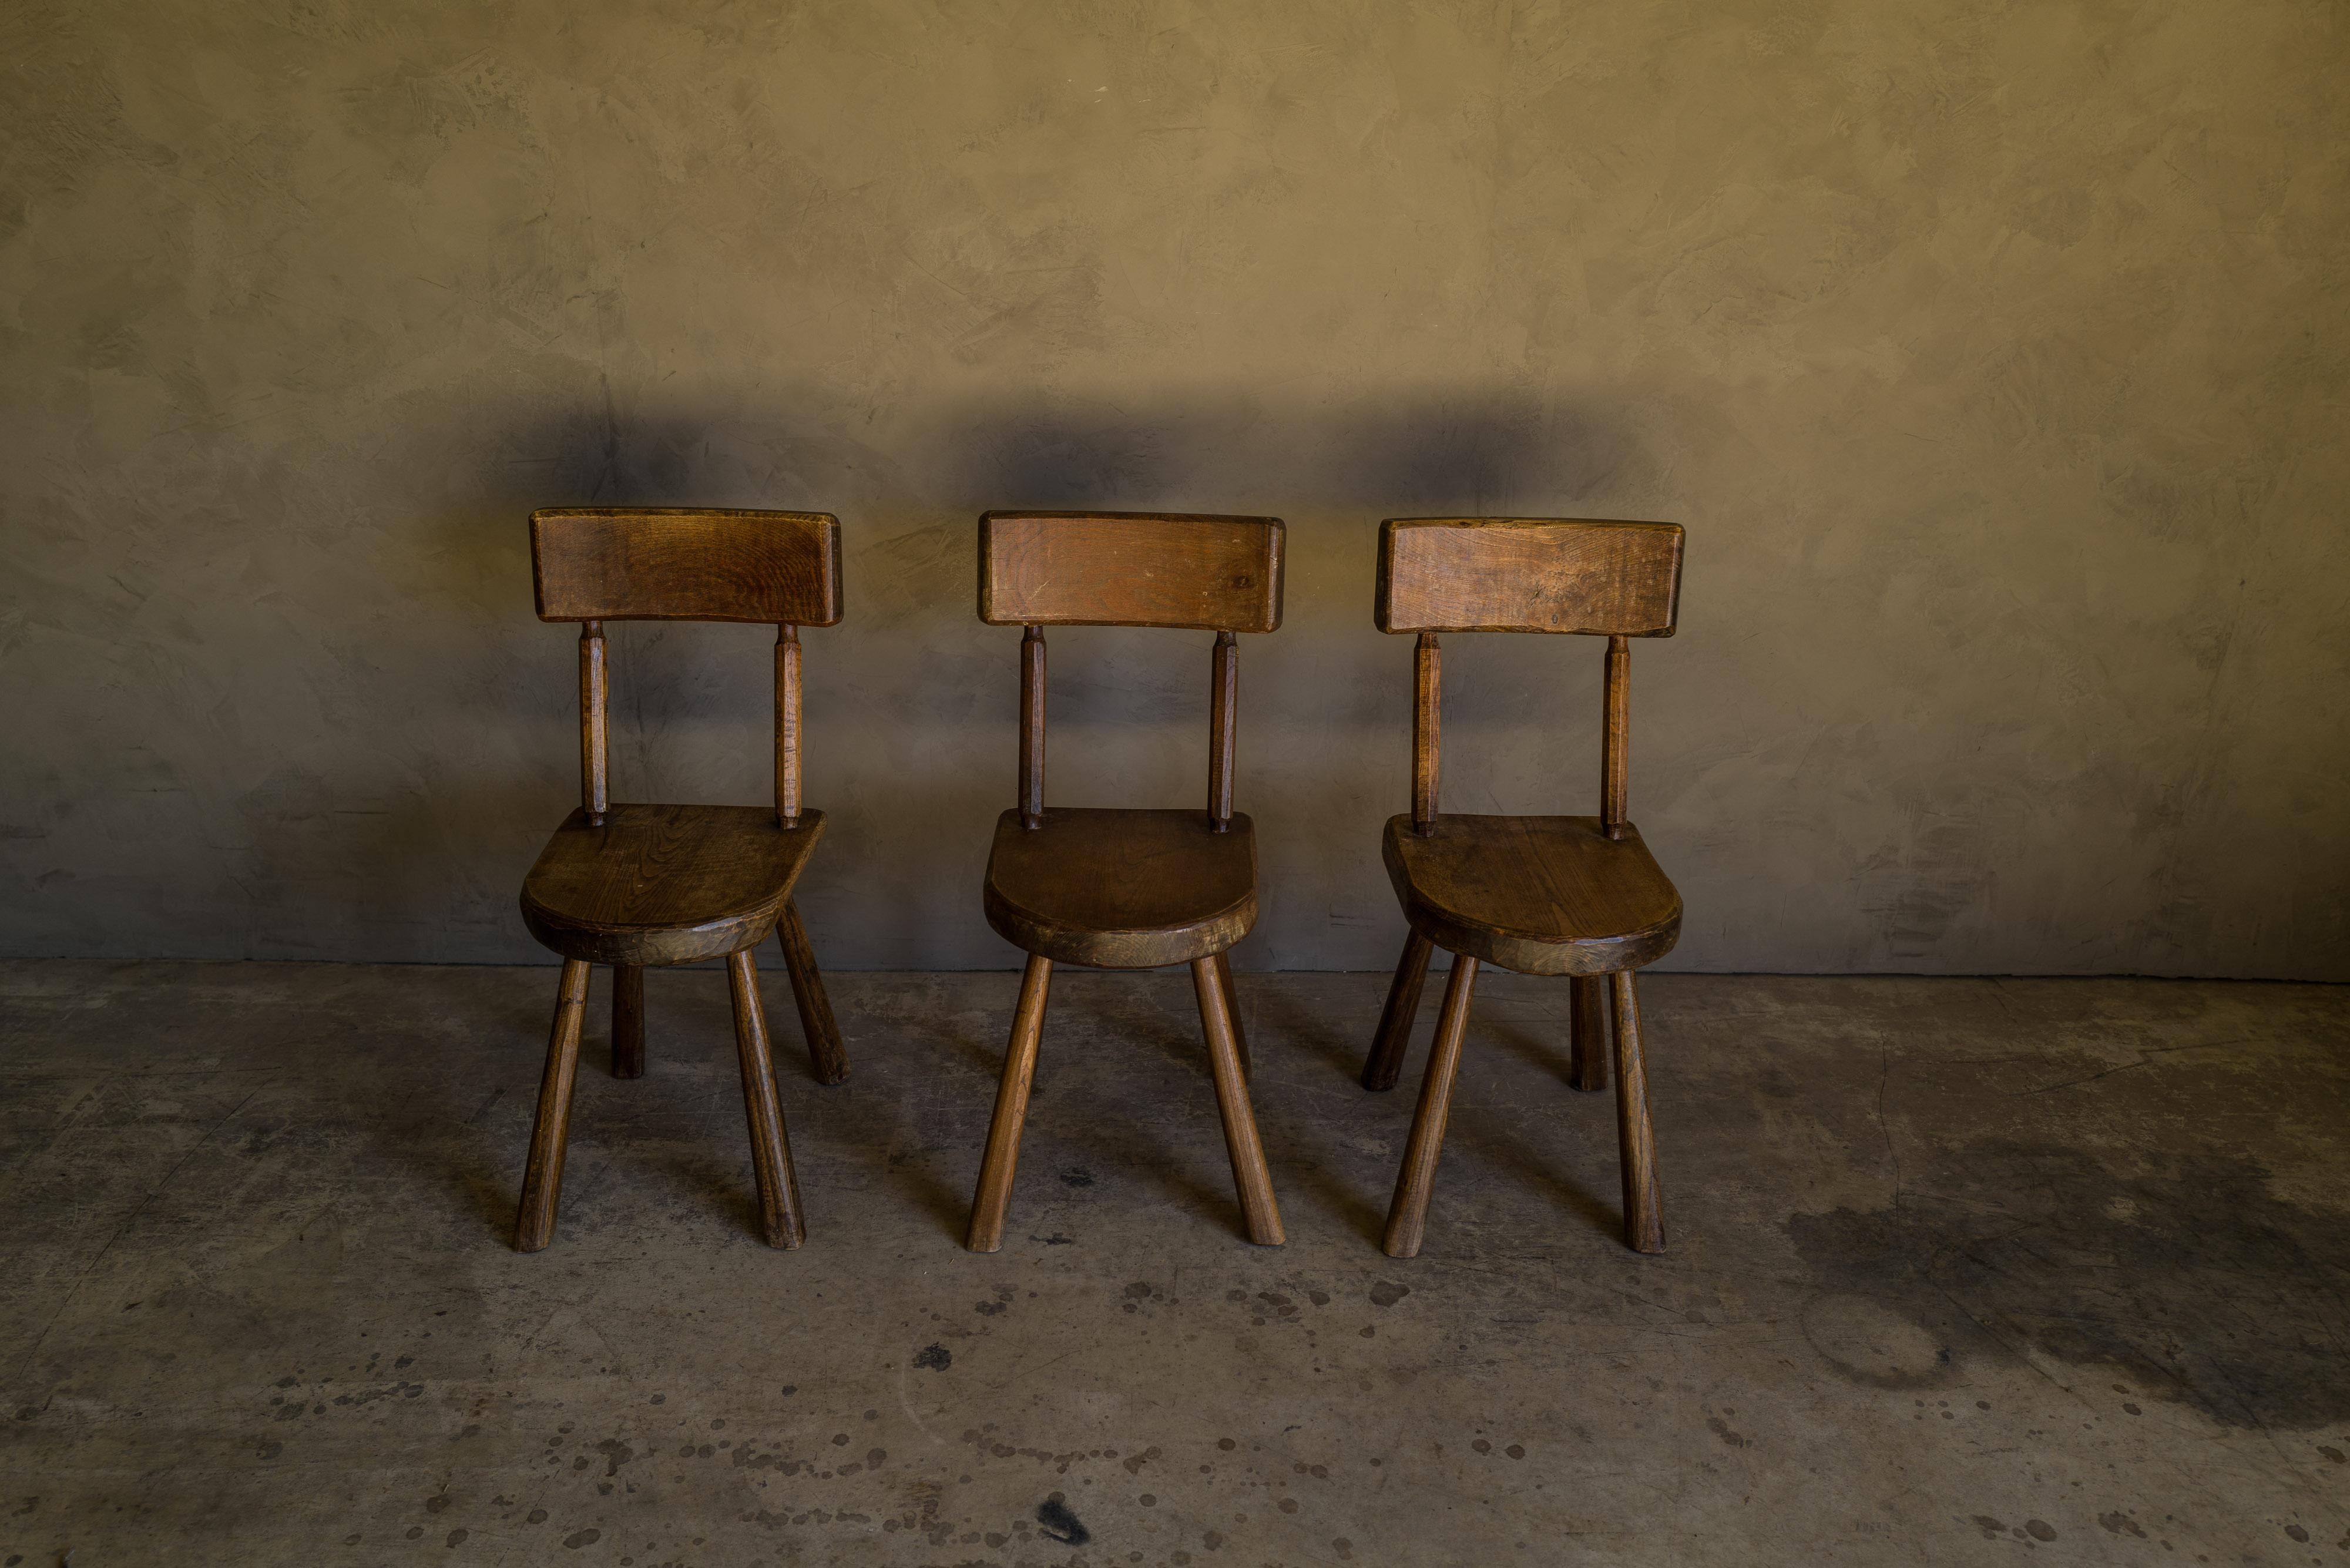 Set of three vintage oak chairs from France, circa 1950. Solid oak construction with light patina and wear.